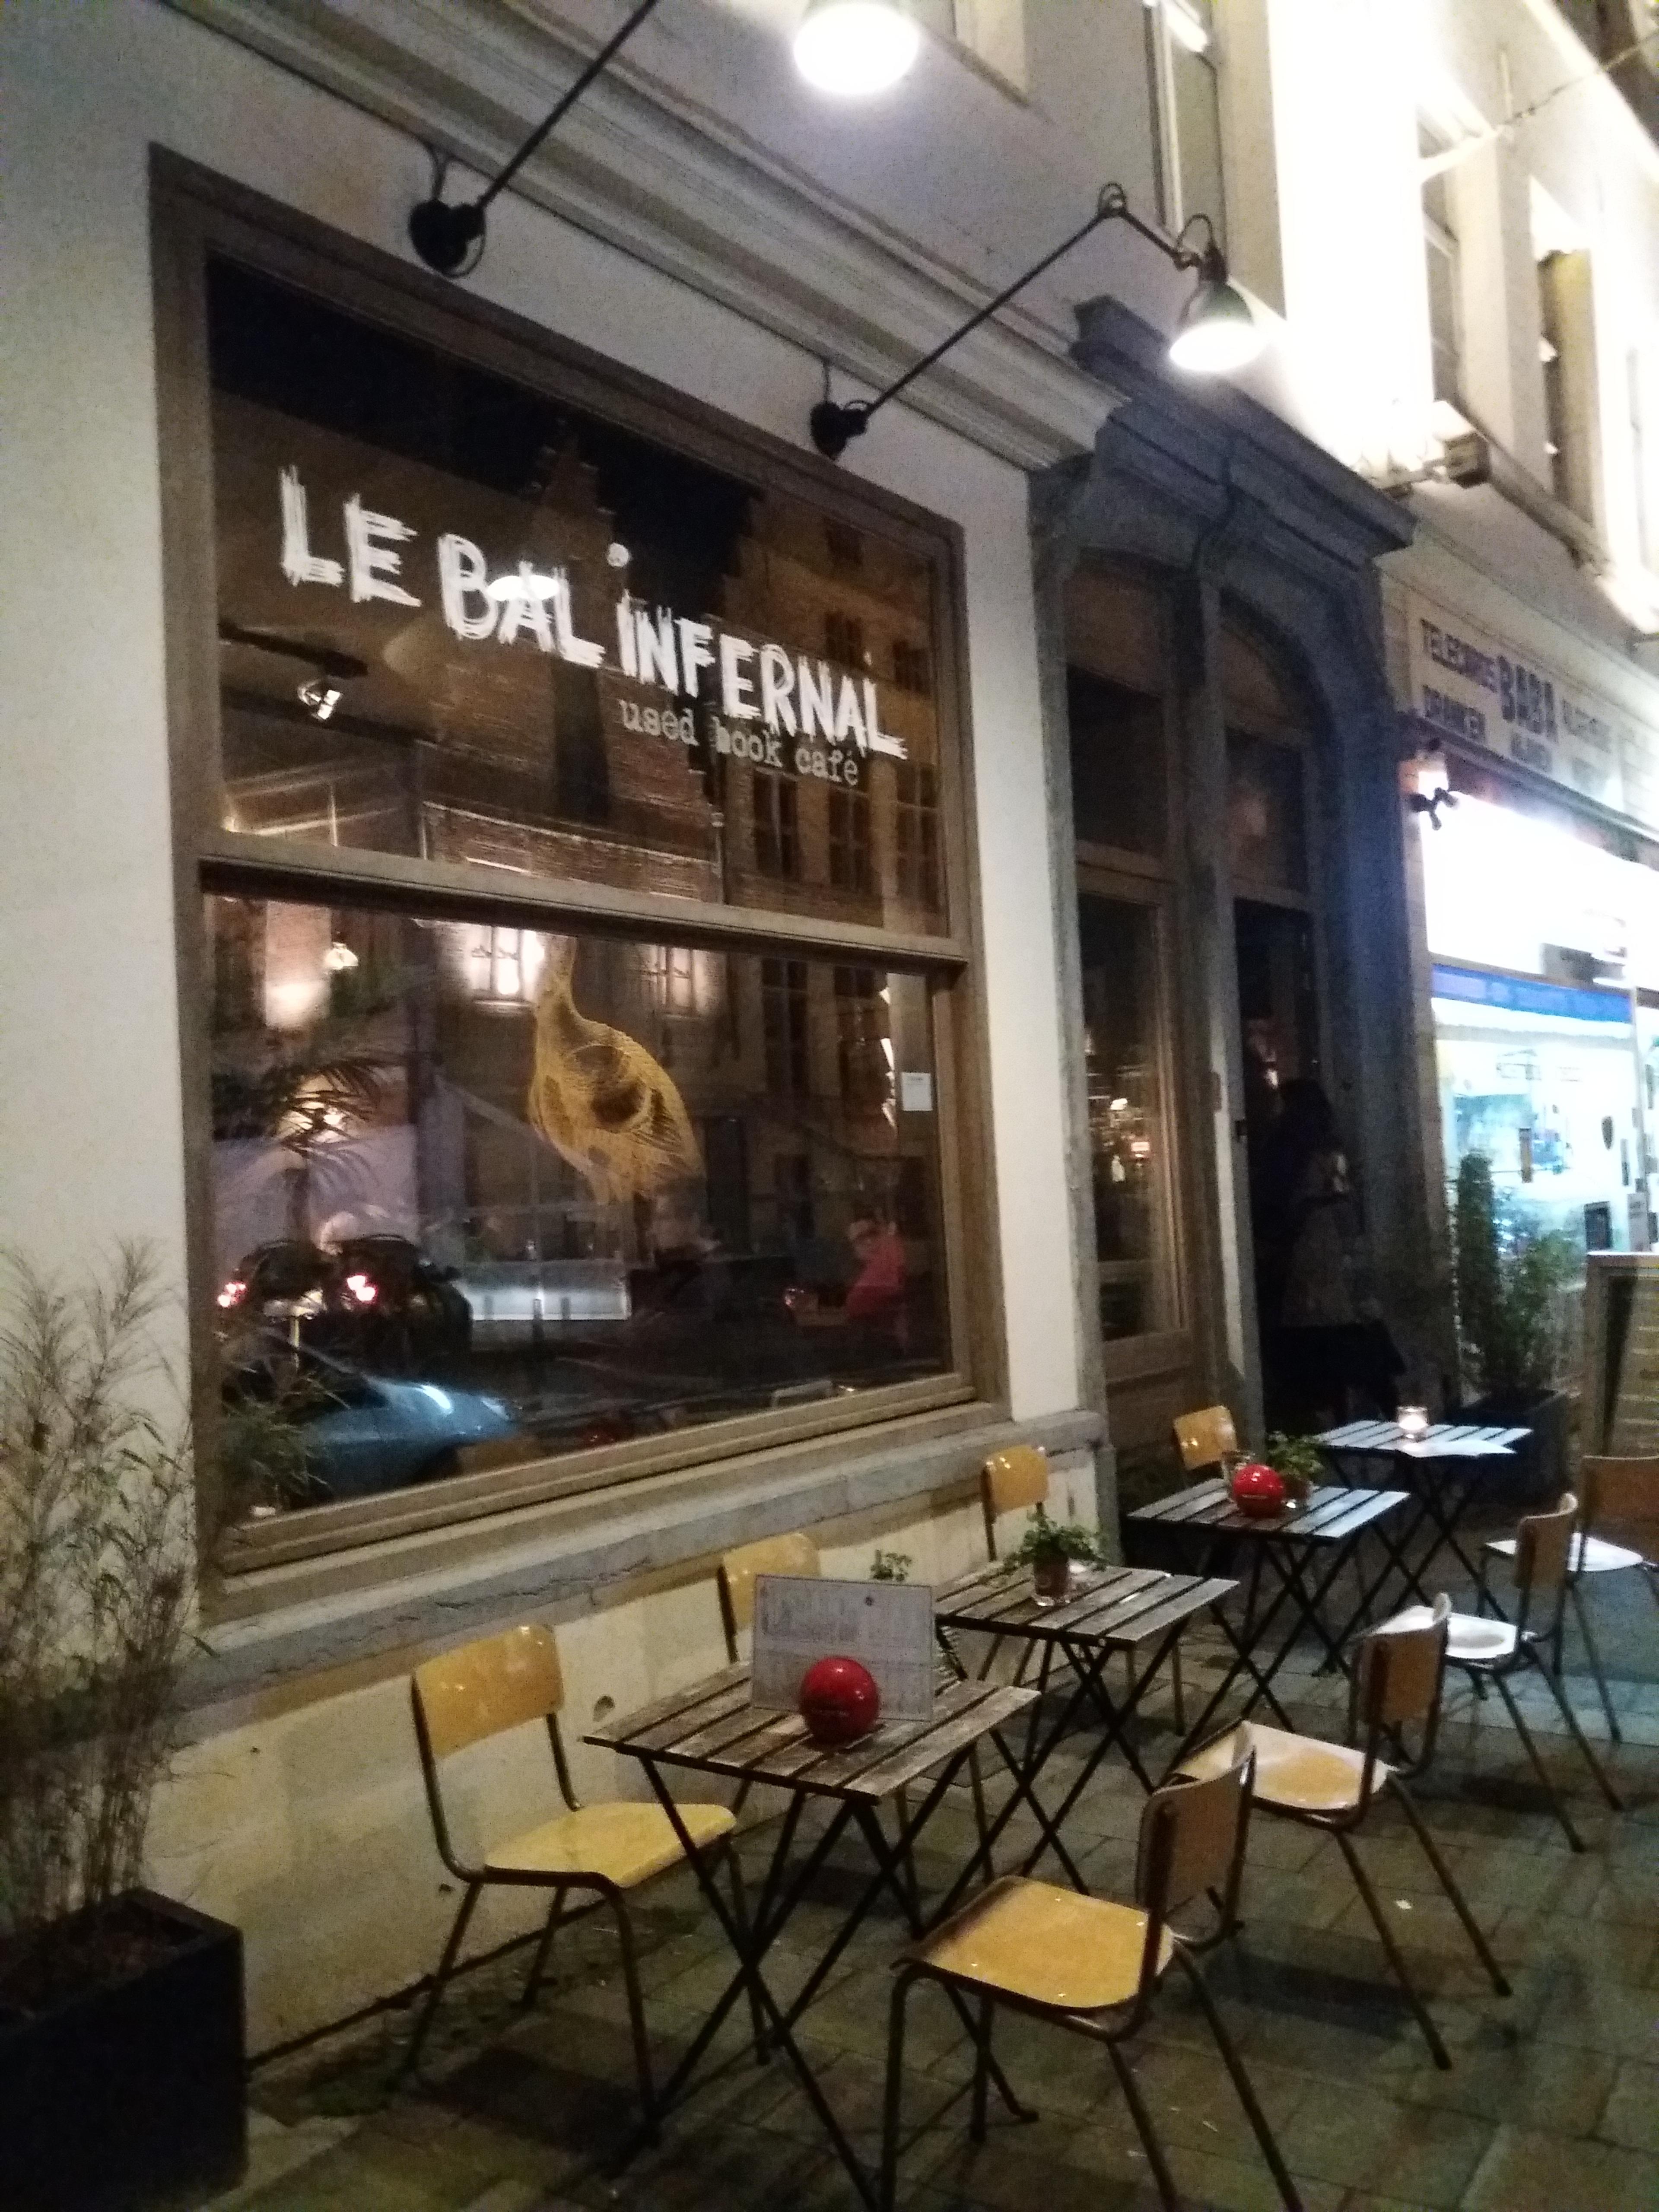 Cover image of this place Le Bal Infernal - used book café